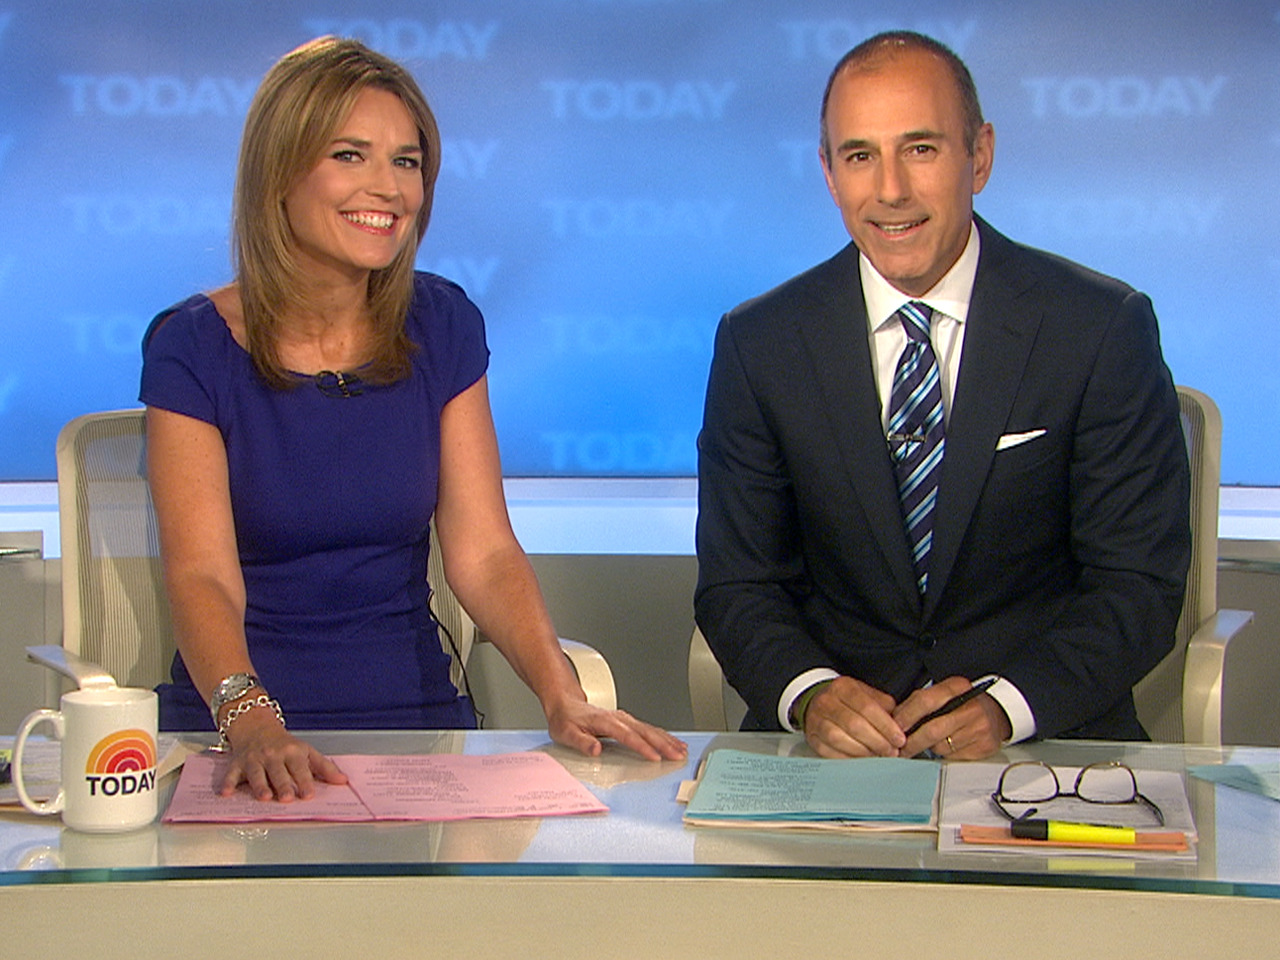 It’s a big day: Savannah Guthrie took her seat as the co-anchor of TODAY.
Congratulations, Savannah!